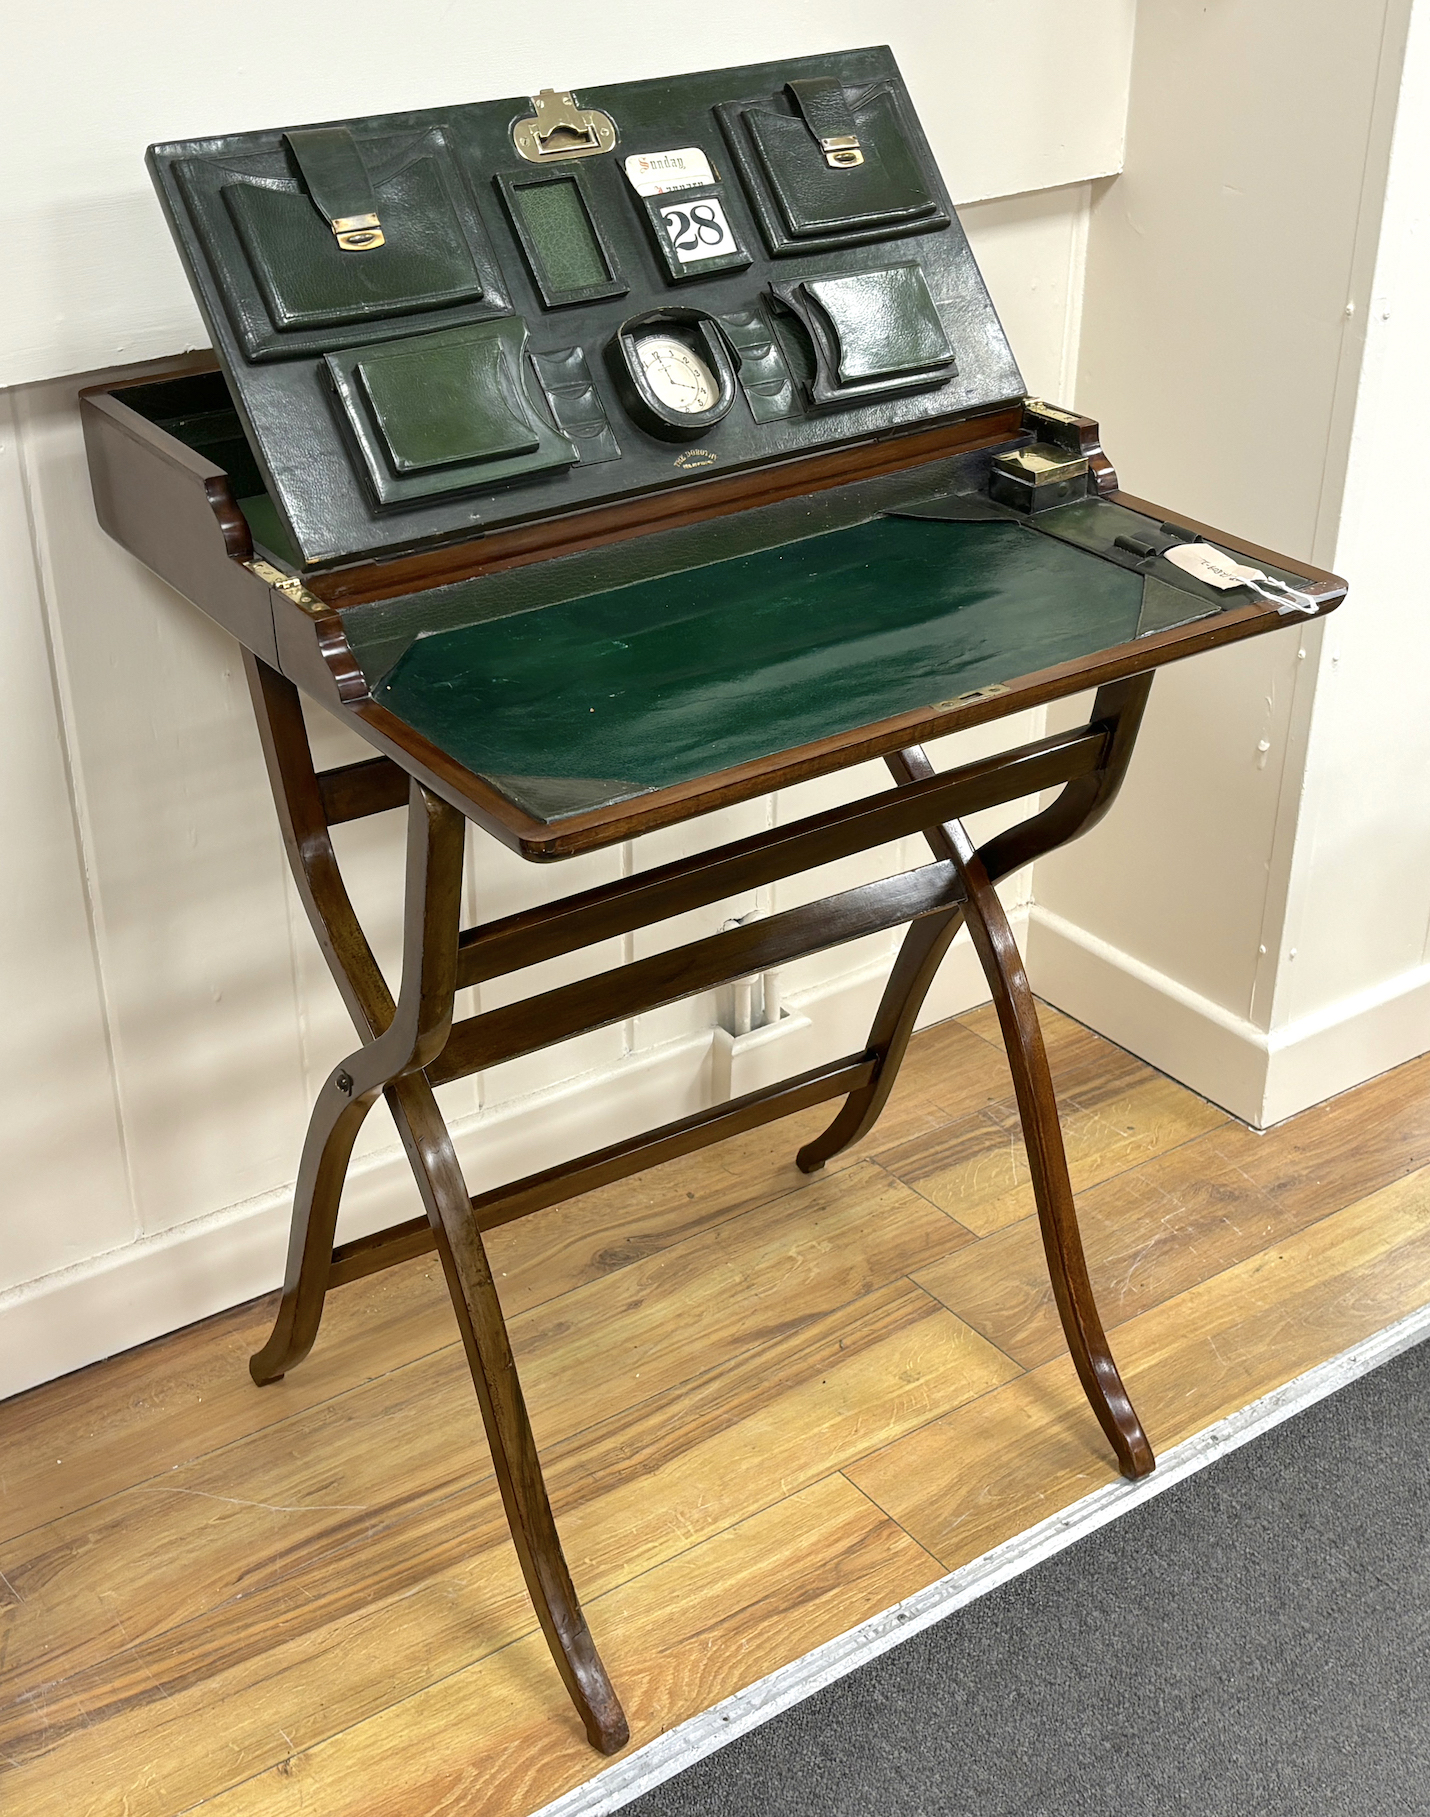 An early 20th century mahogany travelling or campaign desk, width 61cm, depth 30cm, height 85cm